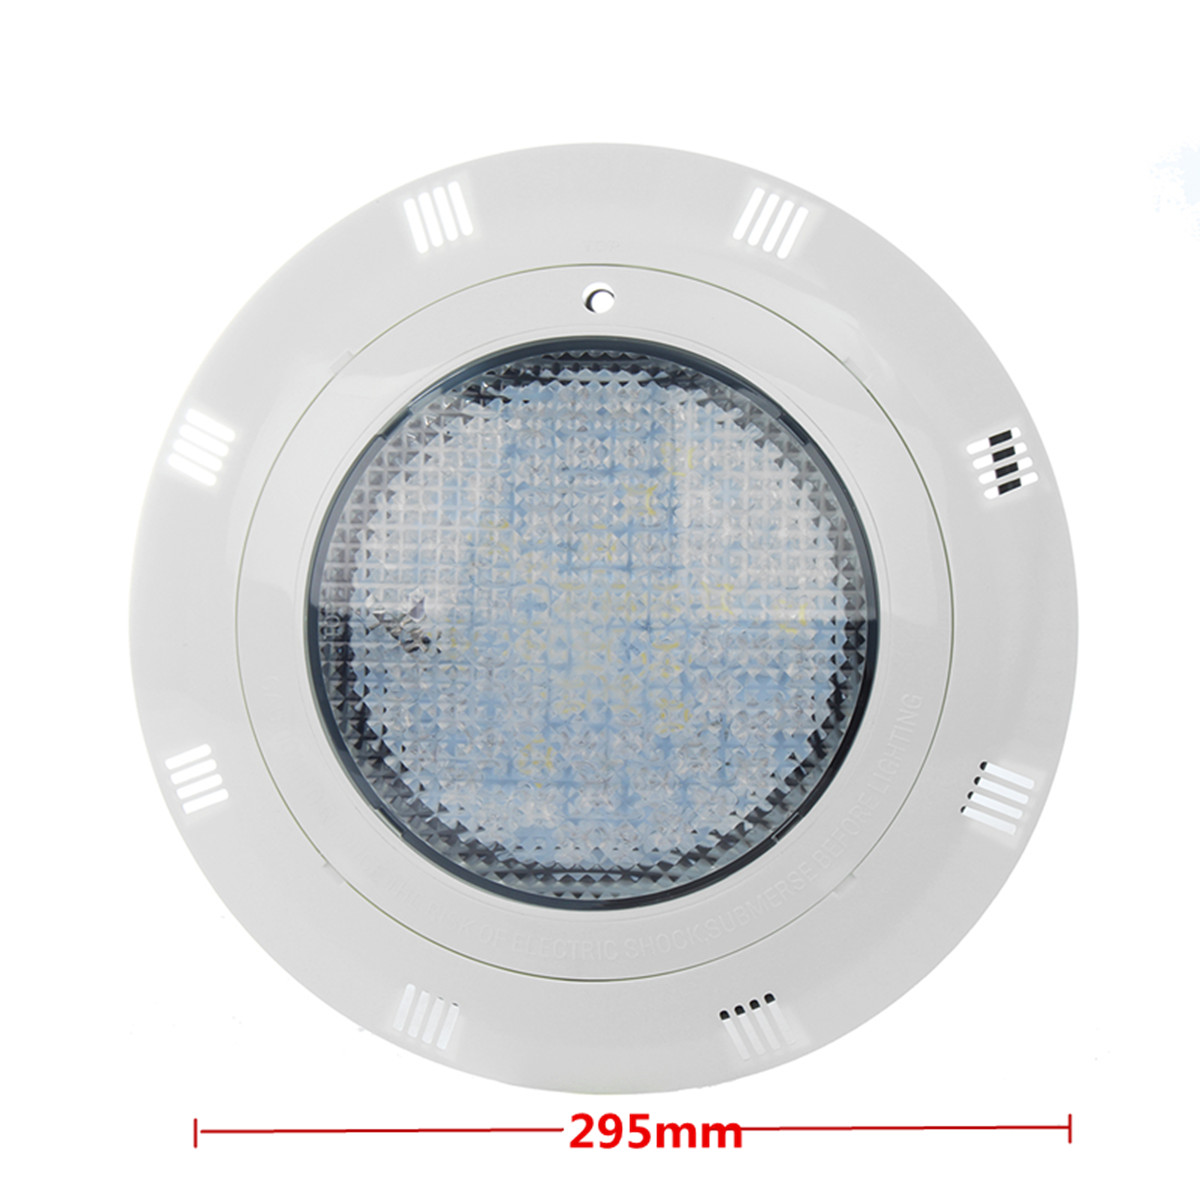 Find AC12V 45W RGB LED Swimming Pool Light Underwater Wall Mounted Lamp with Remote Control for Sale on Gipsybee.com with cryptocurrencies